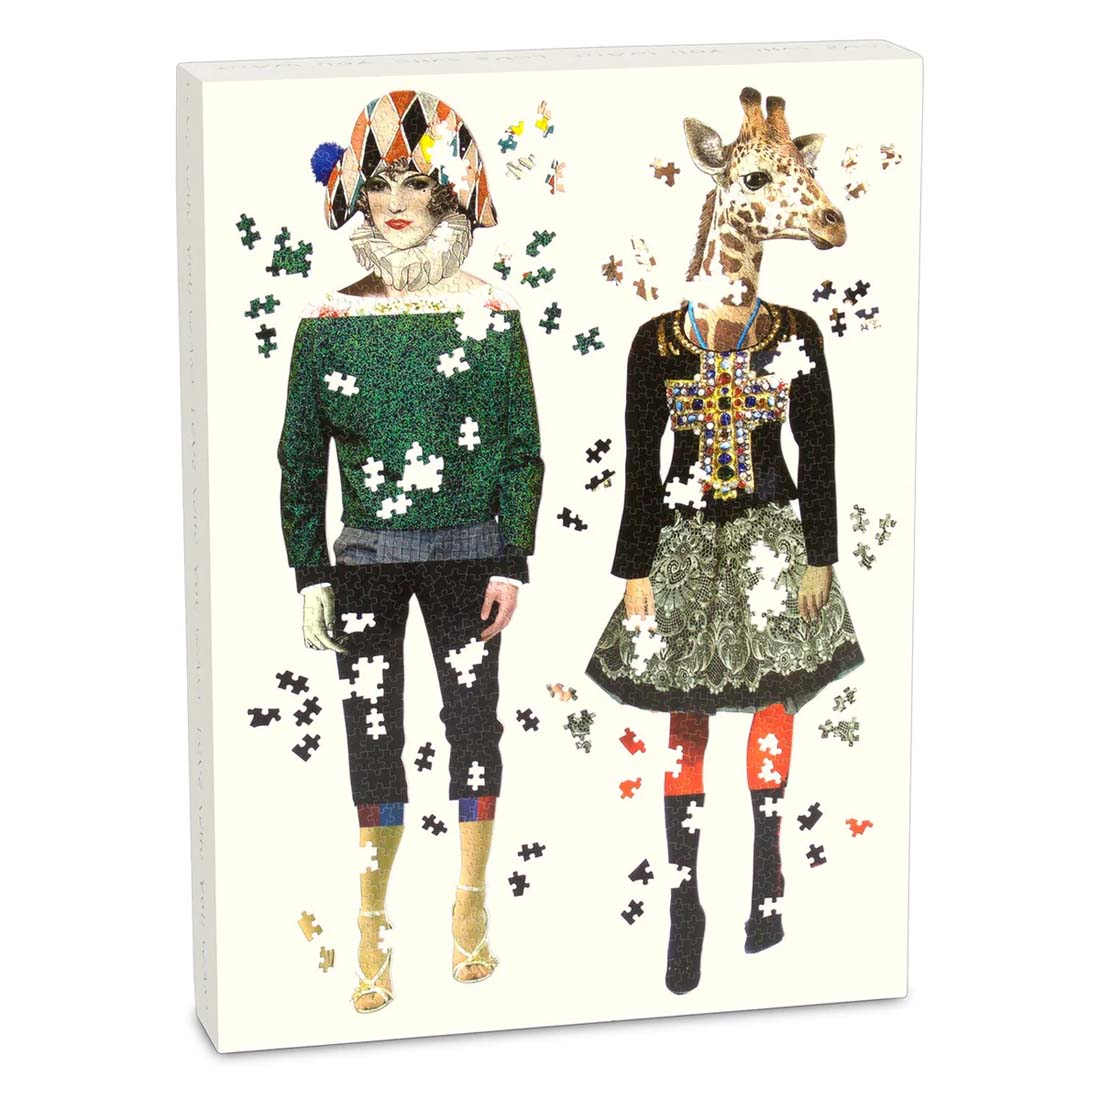 Christian Lacroix Love Who You Want Set of Two Shaped 750-Piece Jigsaw Puzzles